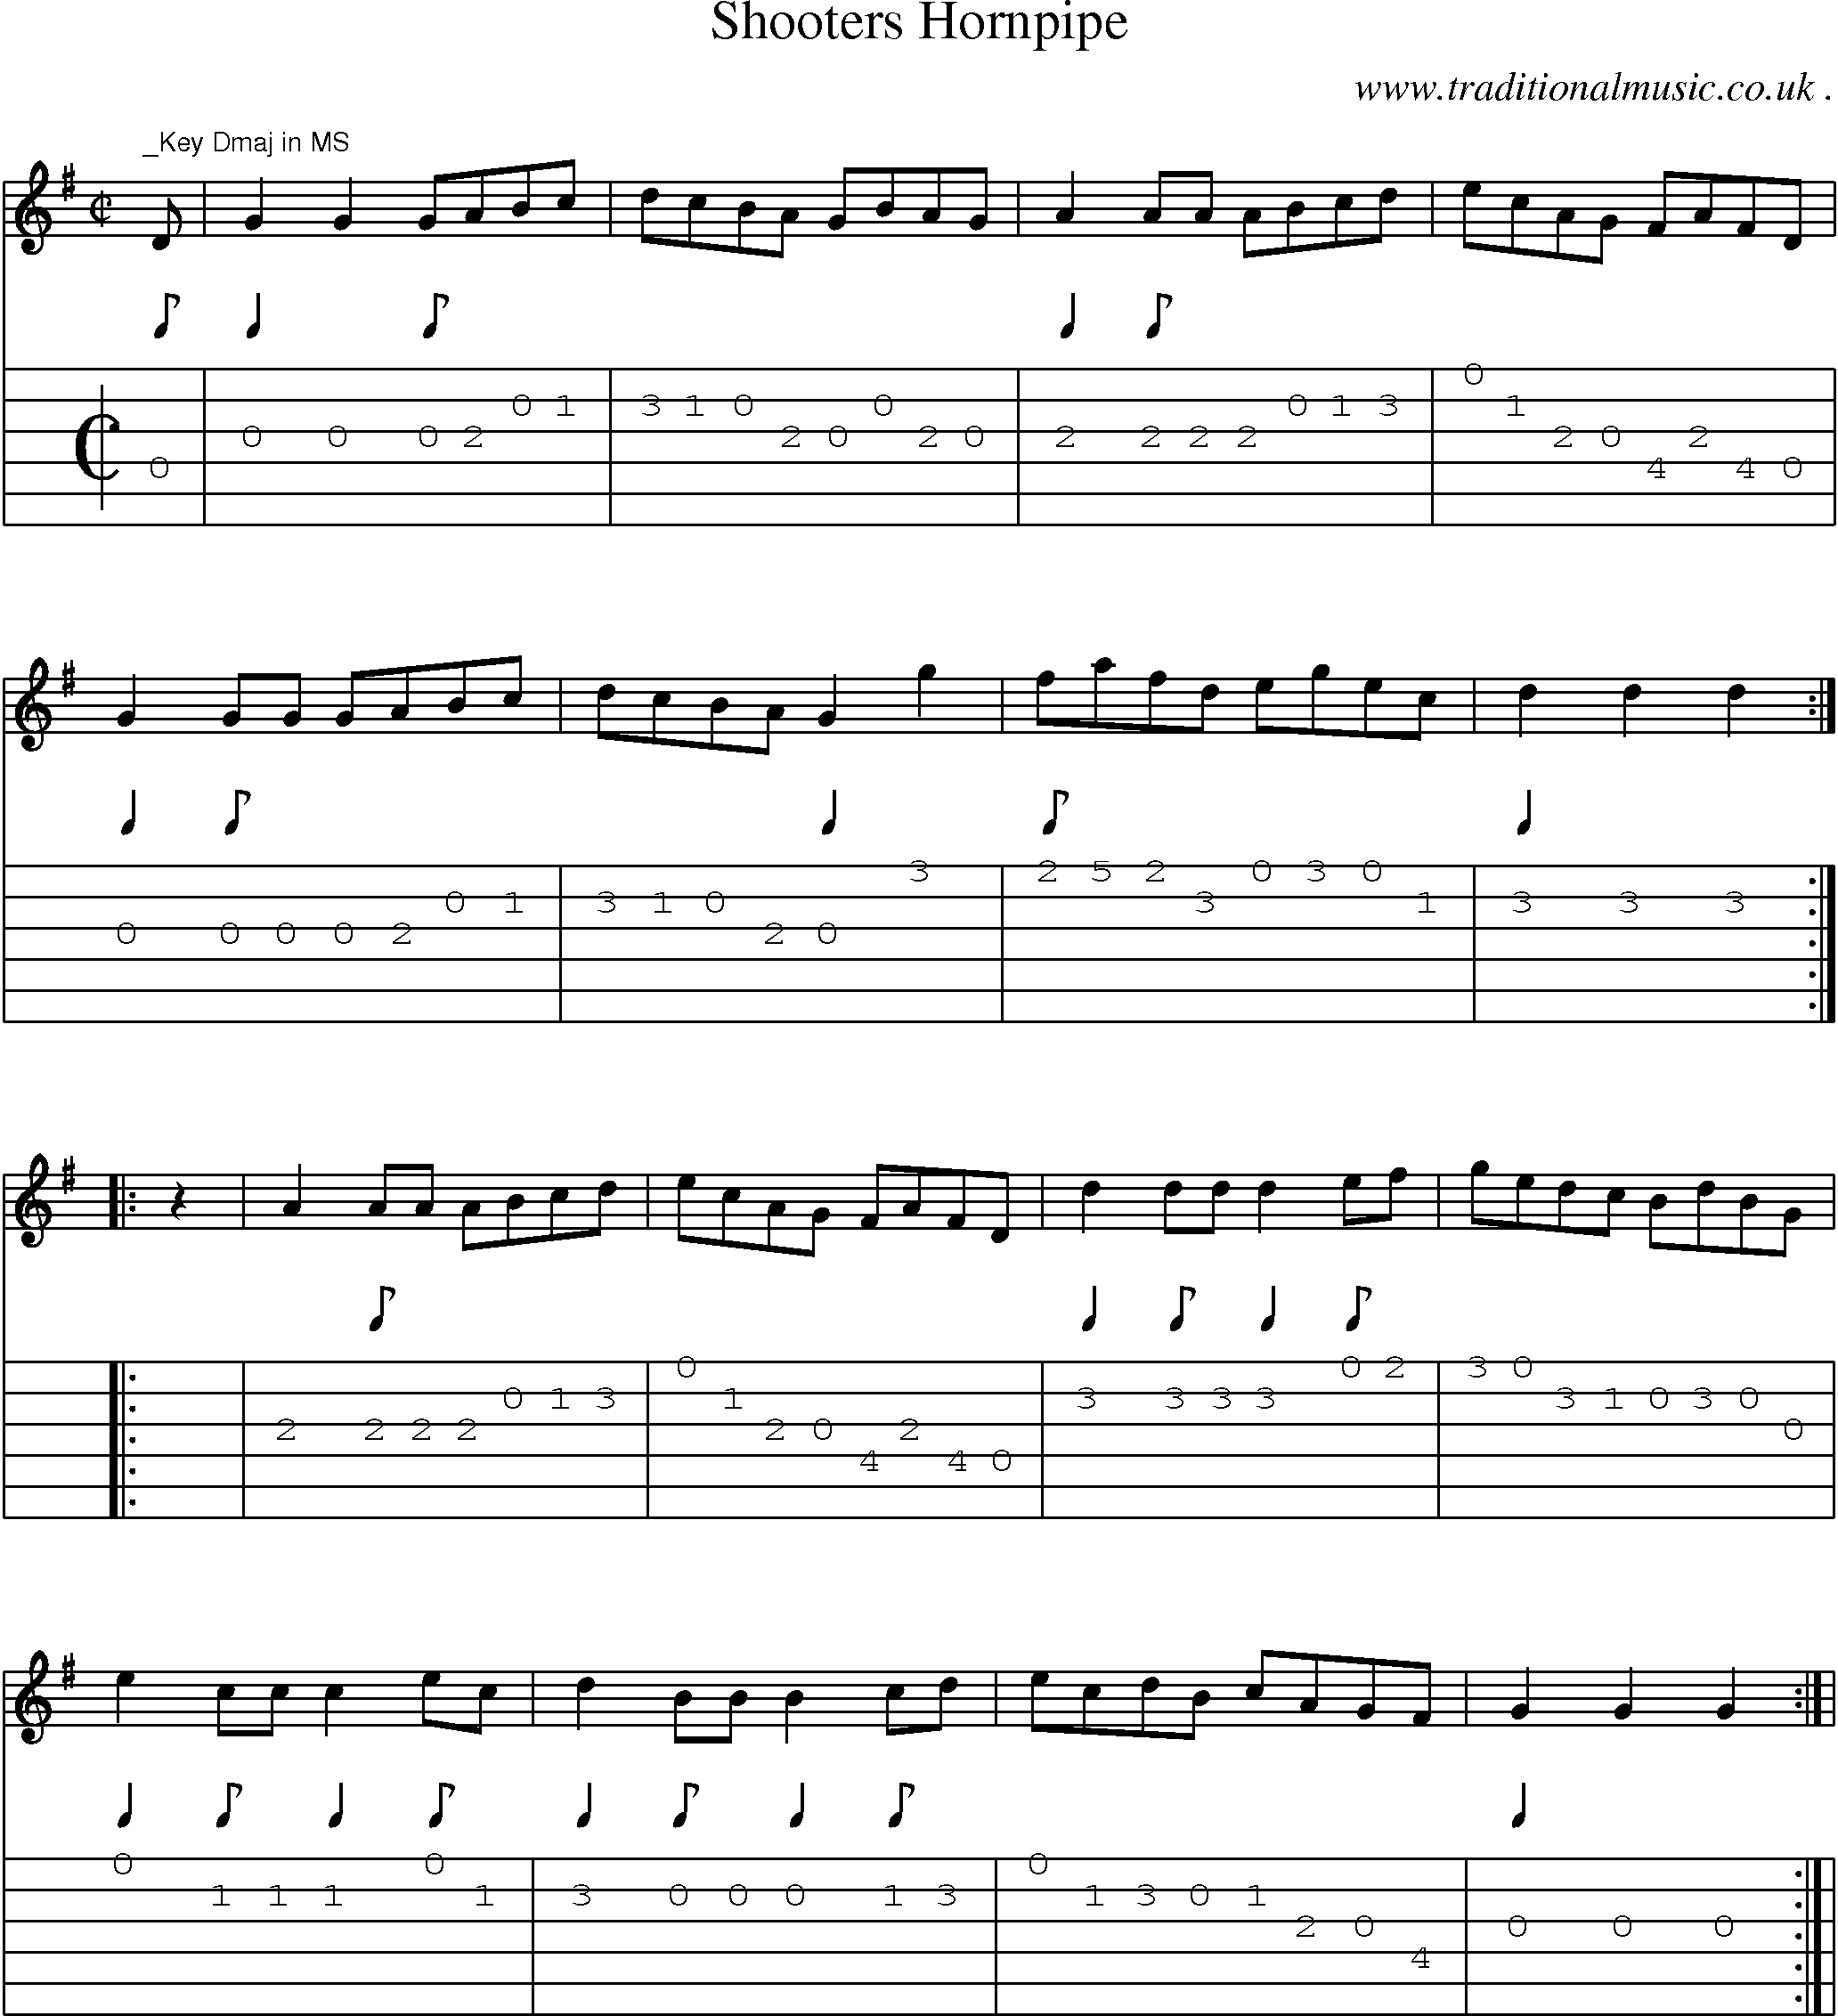 Sheet-Music and Guitar Tabs for Shooters Hornpipe